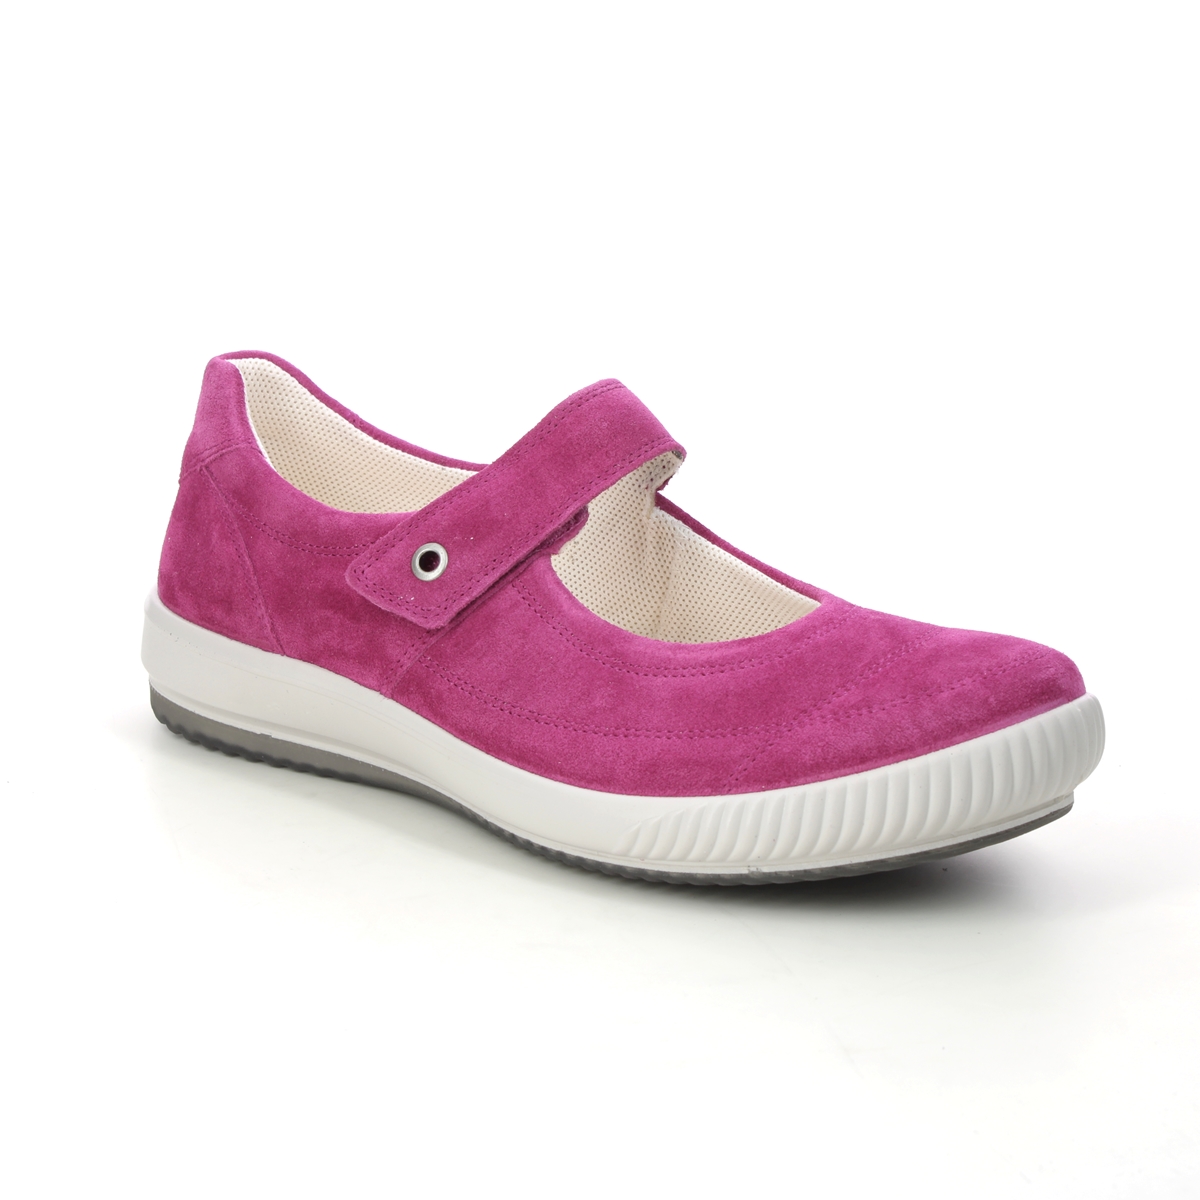 Legero Tanaro Bar Fuchsia Suede Womens Mary Jane Shoes 2000300-5670 in a Plain Leather in Size 6.5